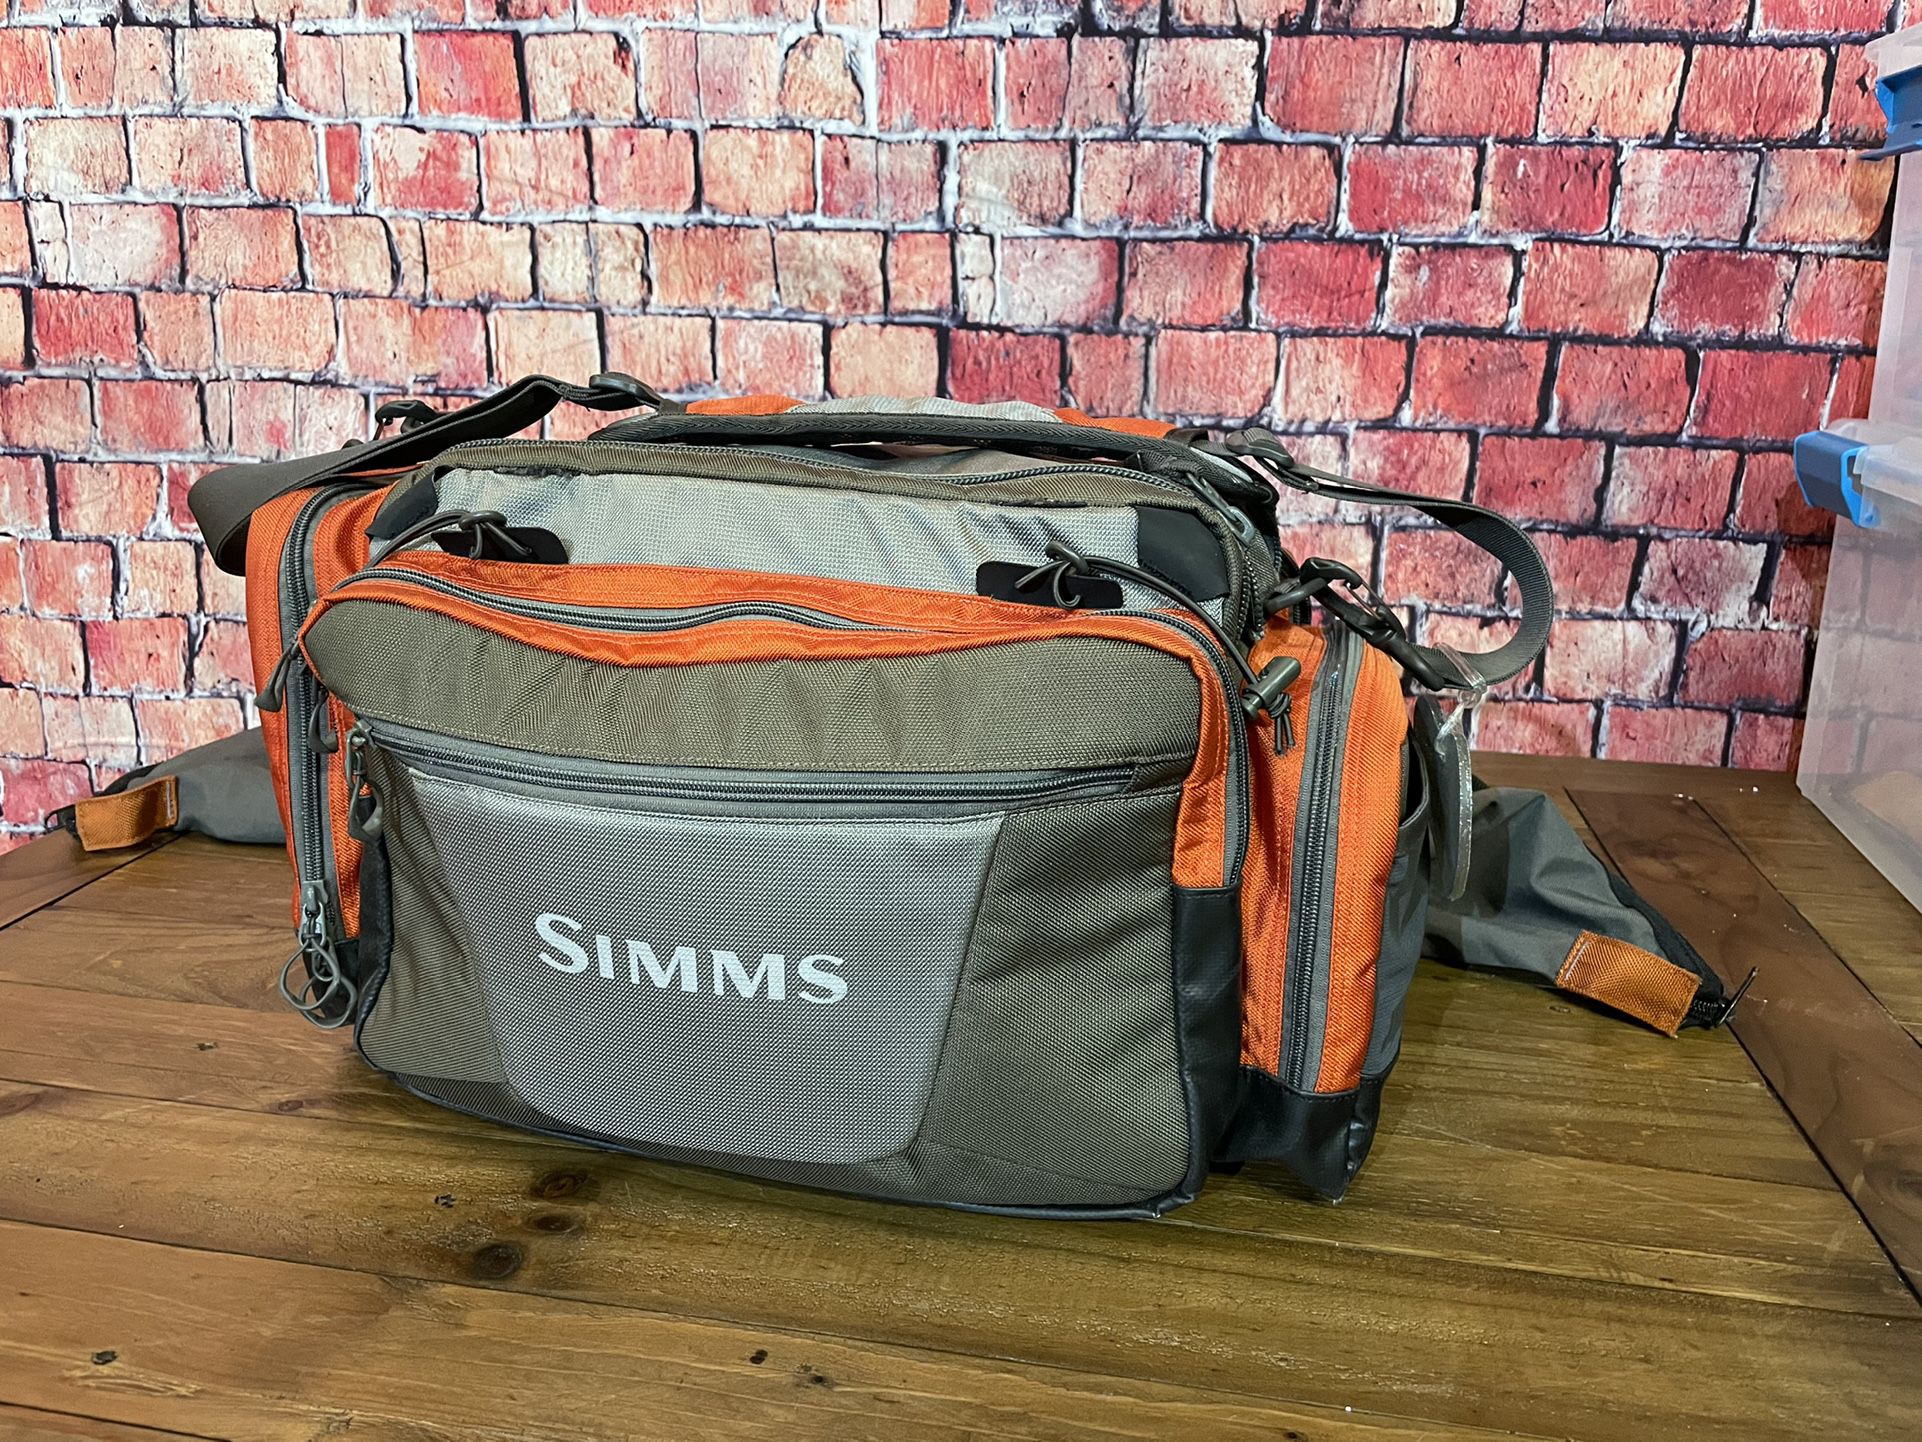 Simms fishing products Challenger Tackle Bag In Orange And Graystone 